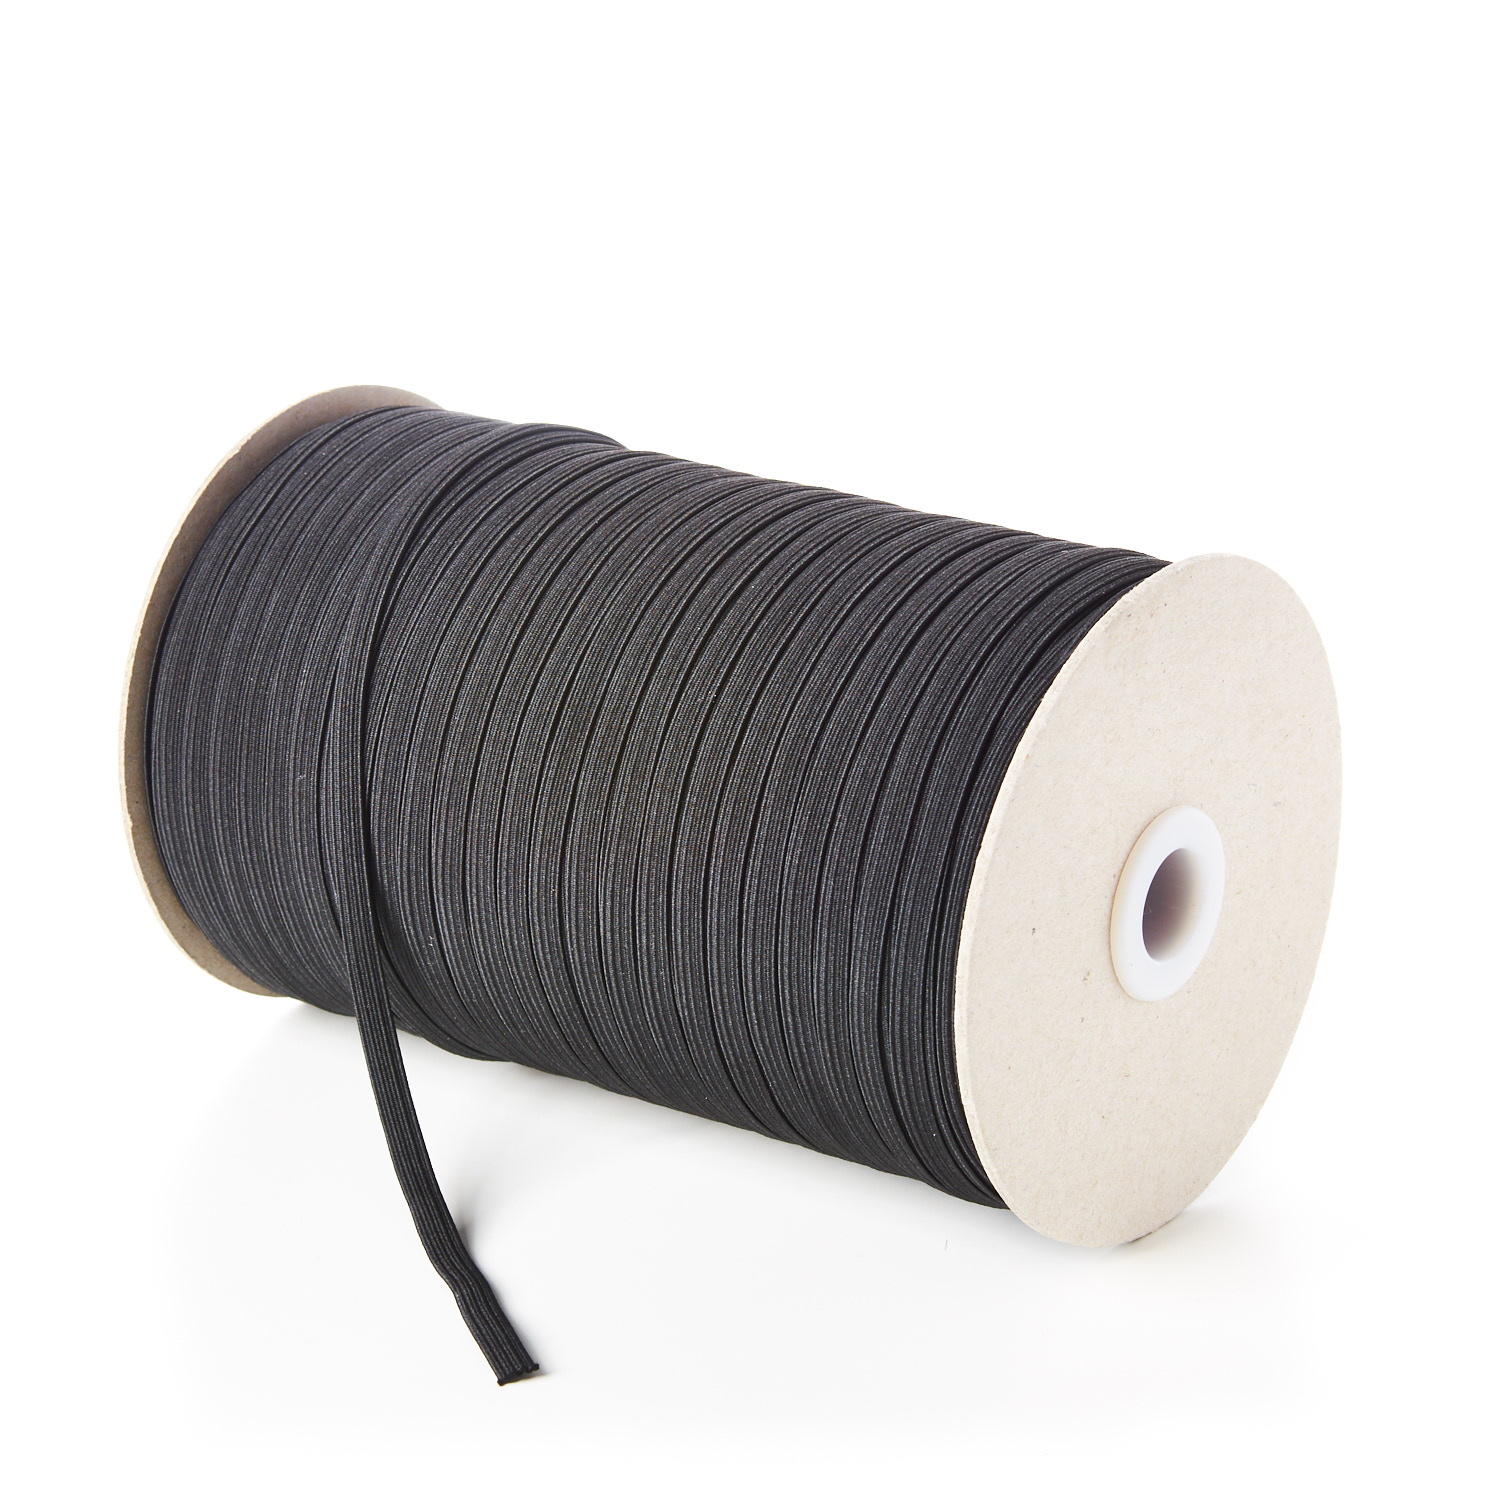 6mm 8 Cord Flat Elastic Black Leicester Trimmings Rubber Polyester Tailoring Haberdashery